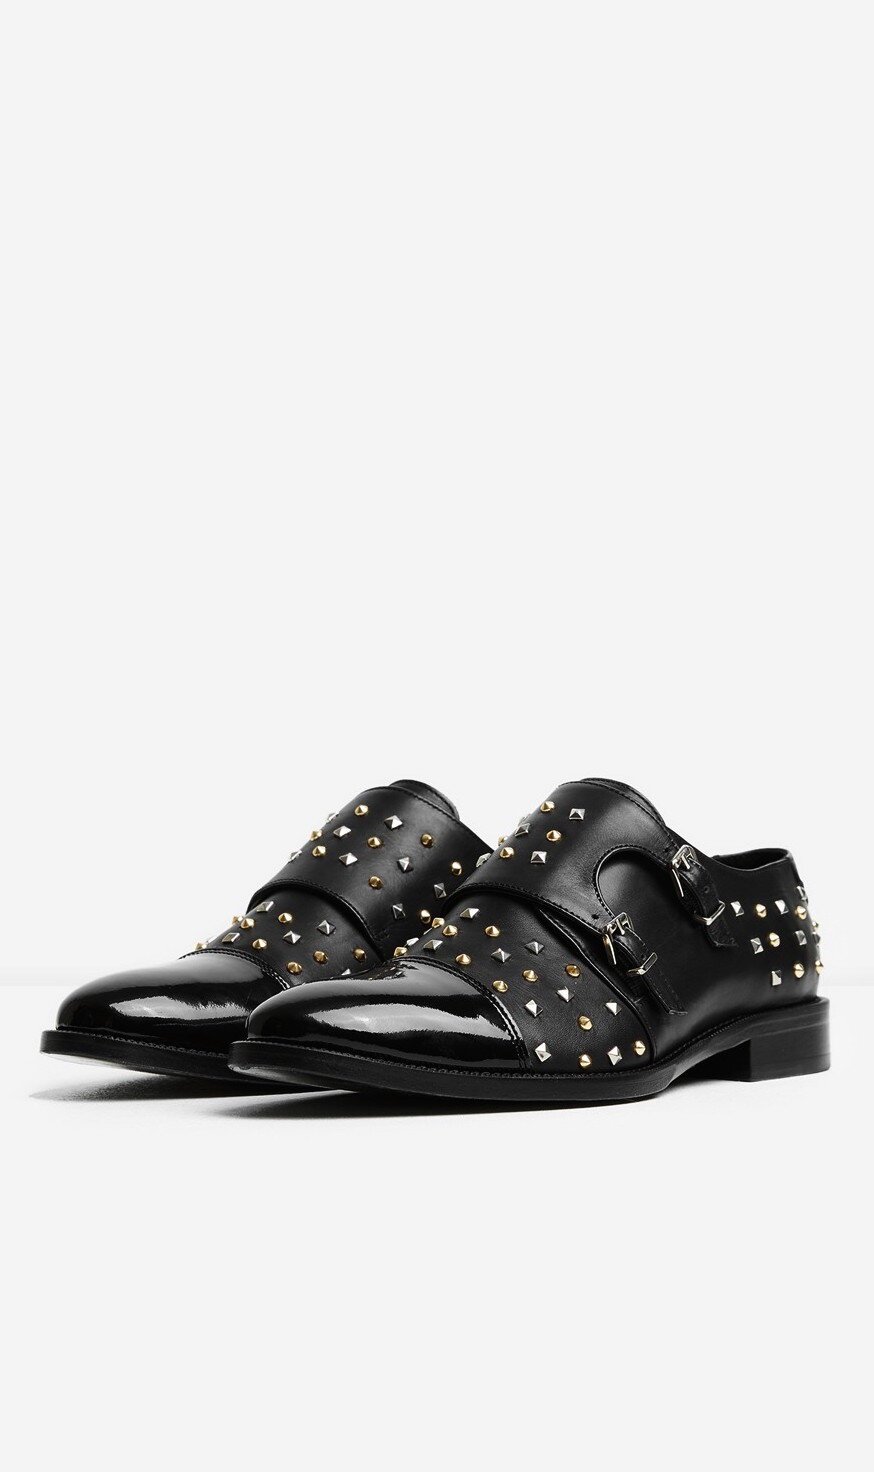 The Kooples Leather Loafers with Studs.jpg